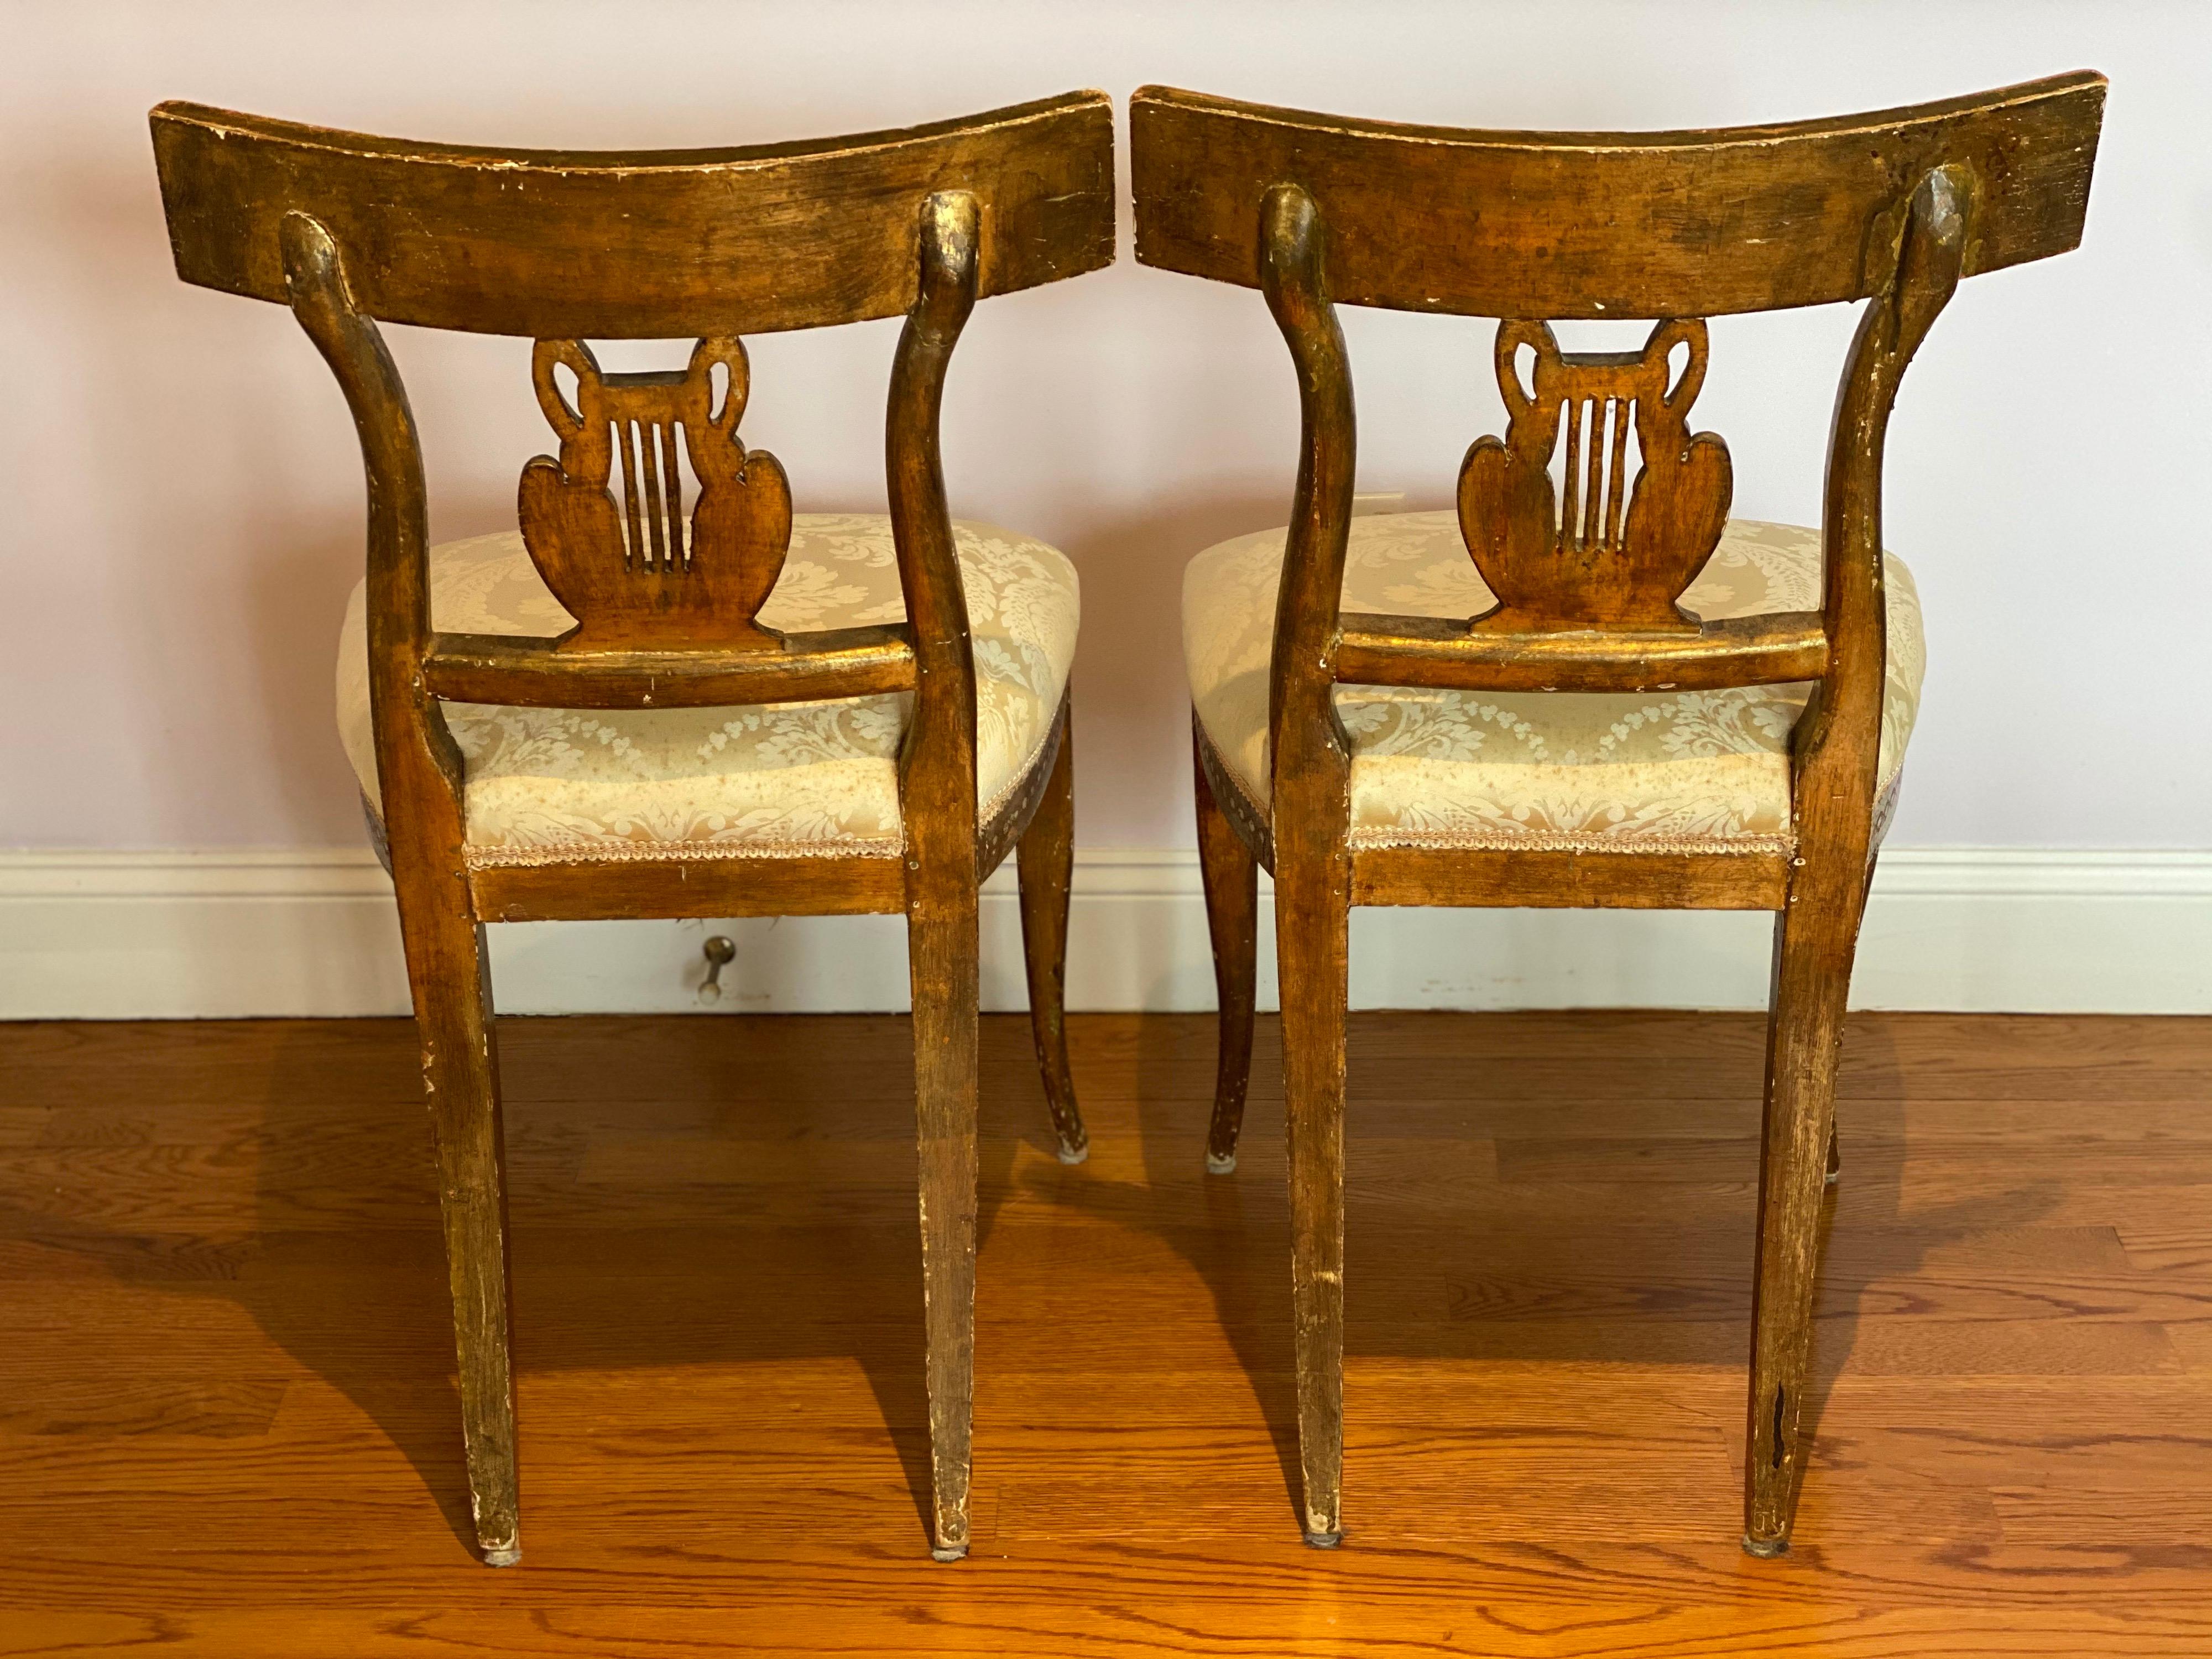 Pair of Italian neoclassical gilt-wood side chairs with Swans and Lyres, late 19th c.
Beautifully carved swan and lyre backs. Upper frame backs incised and gilded on a ivory painted ground scrolling acanthus leaves on the upper frames and gilded